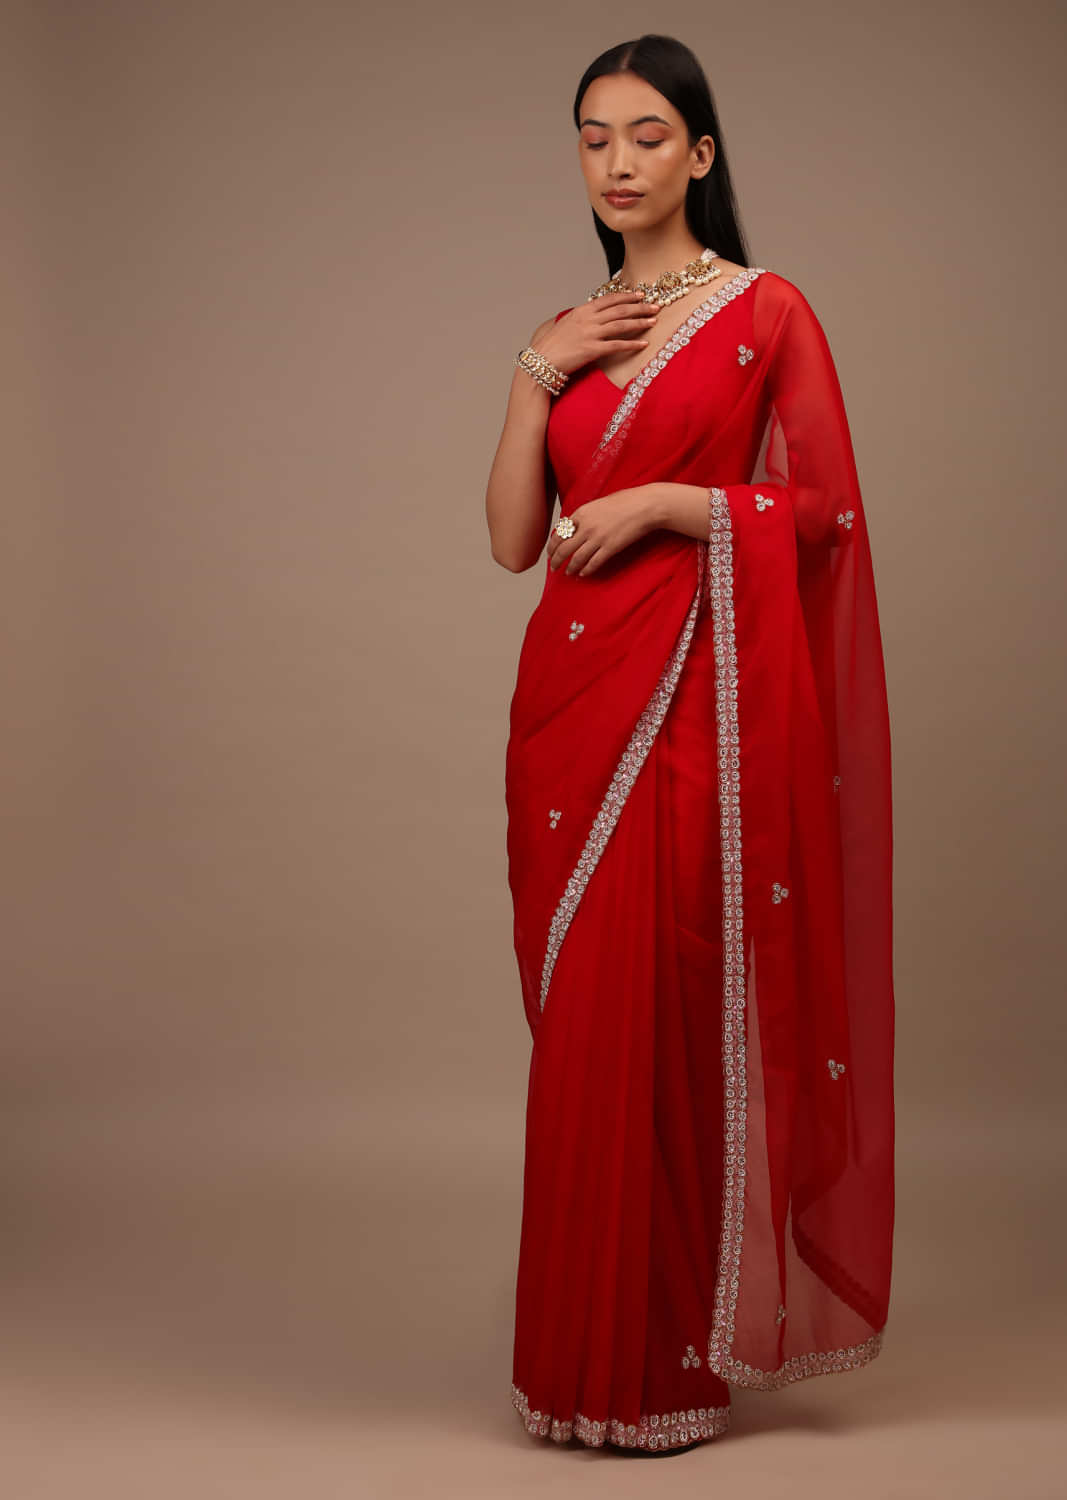 Red Saree In Organza With Hand Embellished Cut Dana And Moti Detailing On The Border